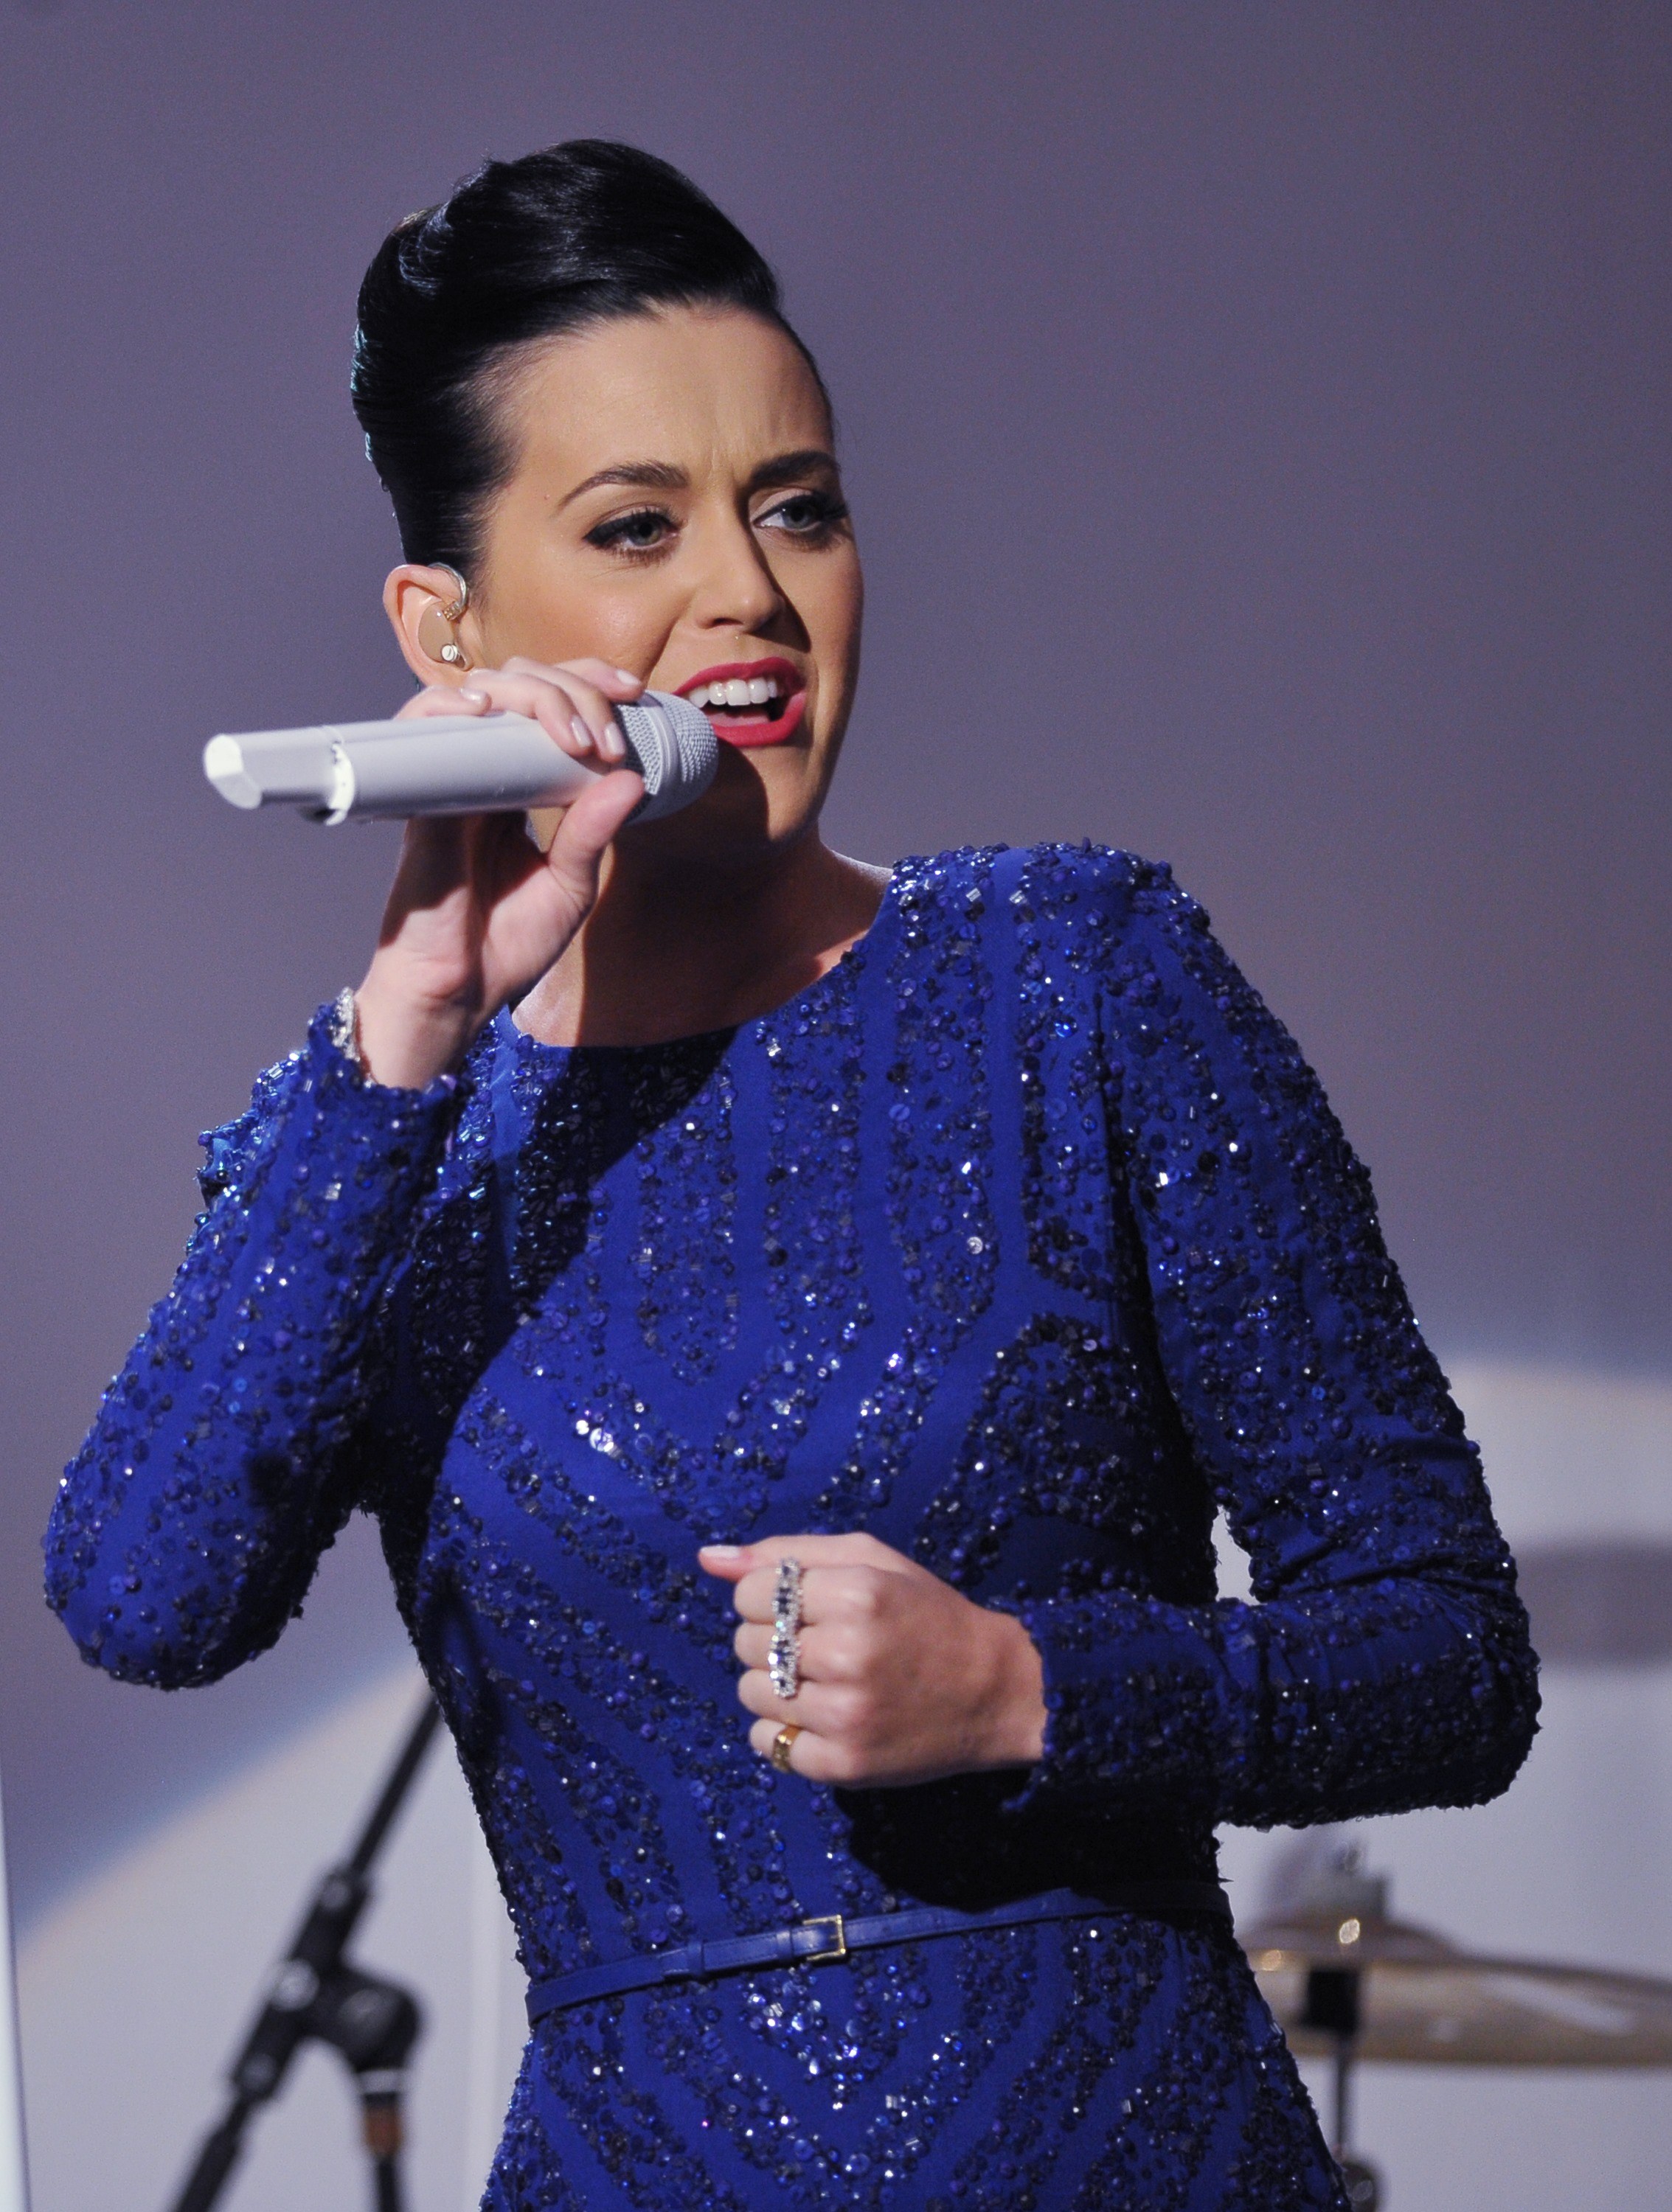 Singer Katy Perry performs at a concert in celebration of the Special Olympics on July 31, 2014 in the East Room of the White House in Washington, DC.    (MANDEL NGAN--AFP/Getty Images) (MANDEL NGAN&mdash;AFP/Getty Images)